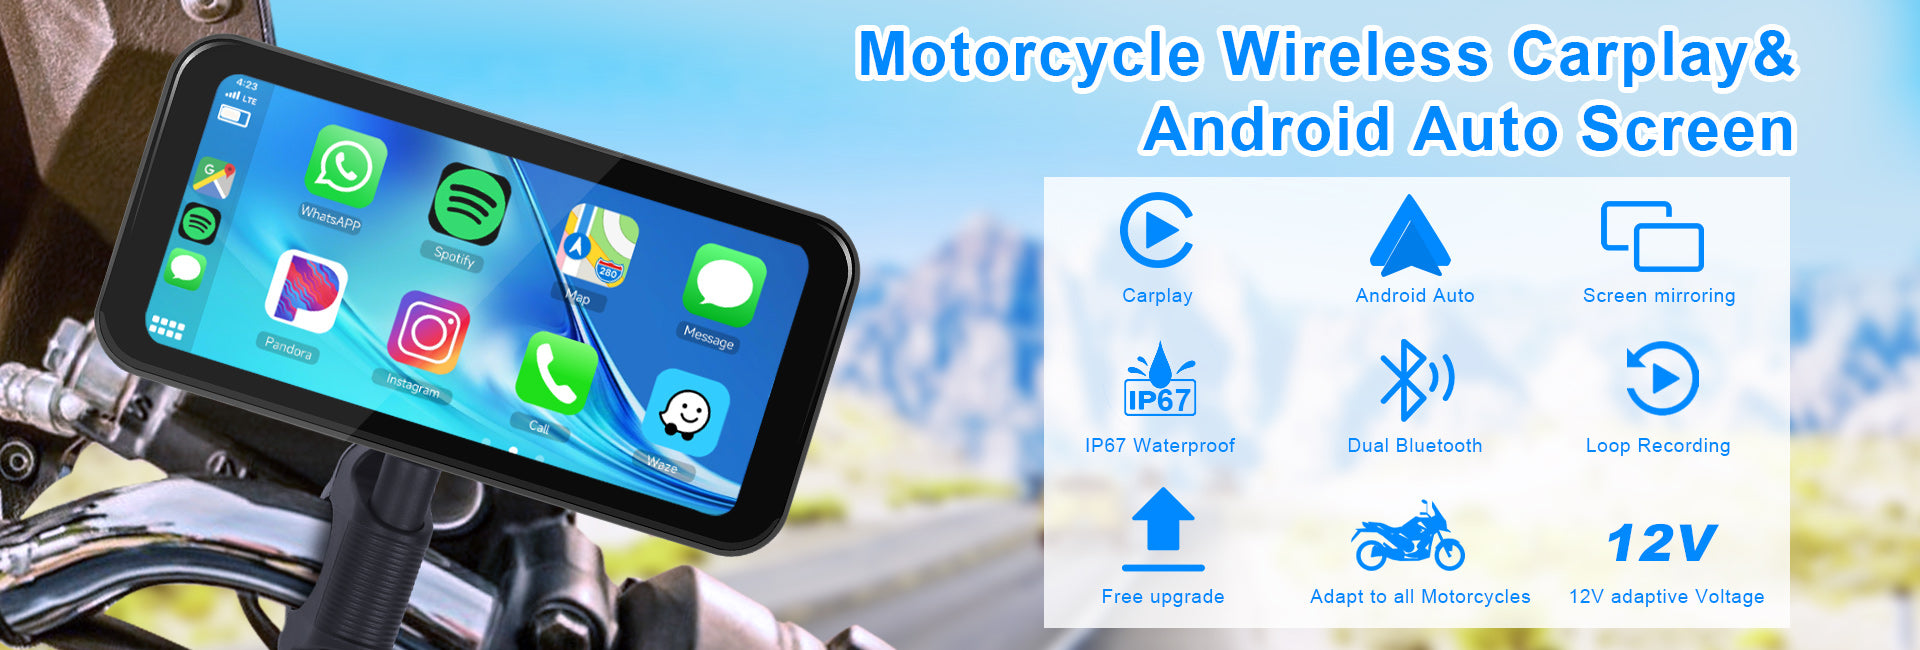 Podofo 6.25-inch Portable Motorcycle Carplay&Android Auto Screen With Steering Wheel Control Waterproof IP67, Bluetooth Helmet, Auto Brightness